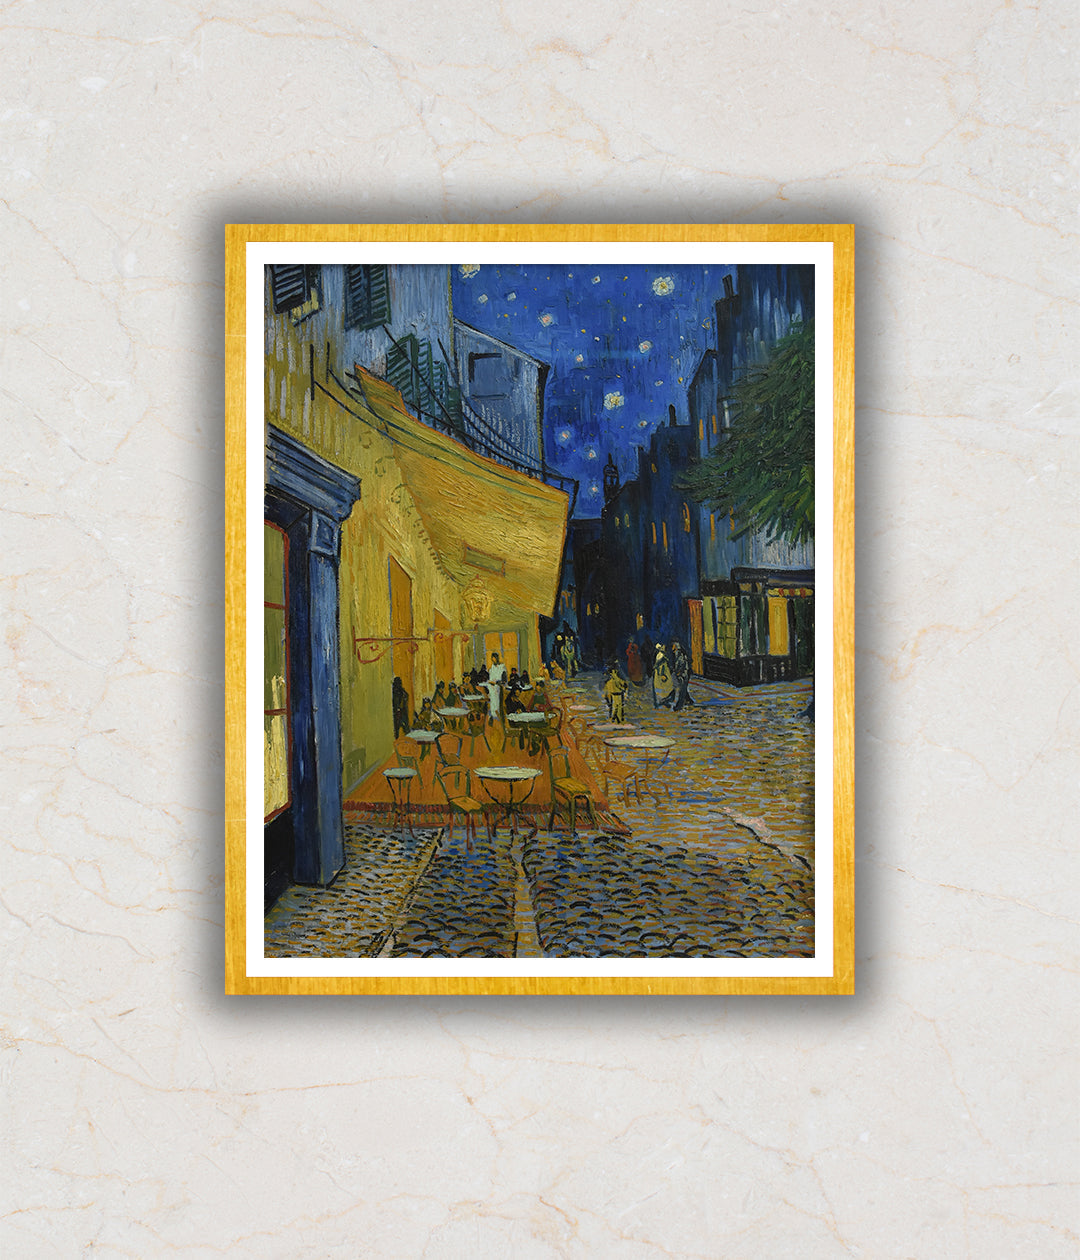 Caf�_terras Bij Nacht Painting For Home Wall Art D�_cor By Vincent Van Gogh (1853-1890)